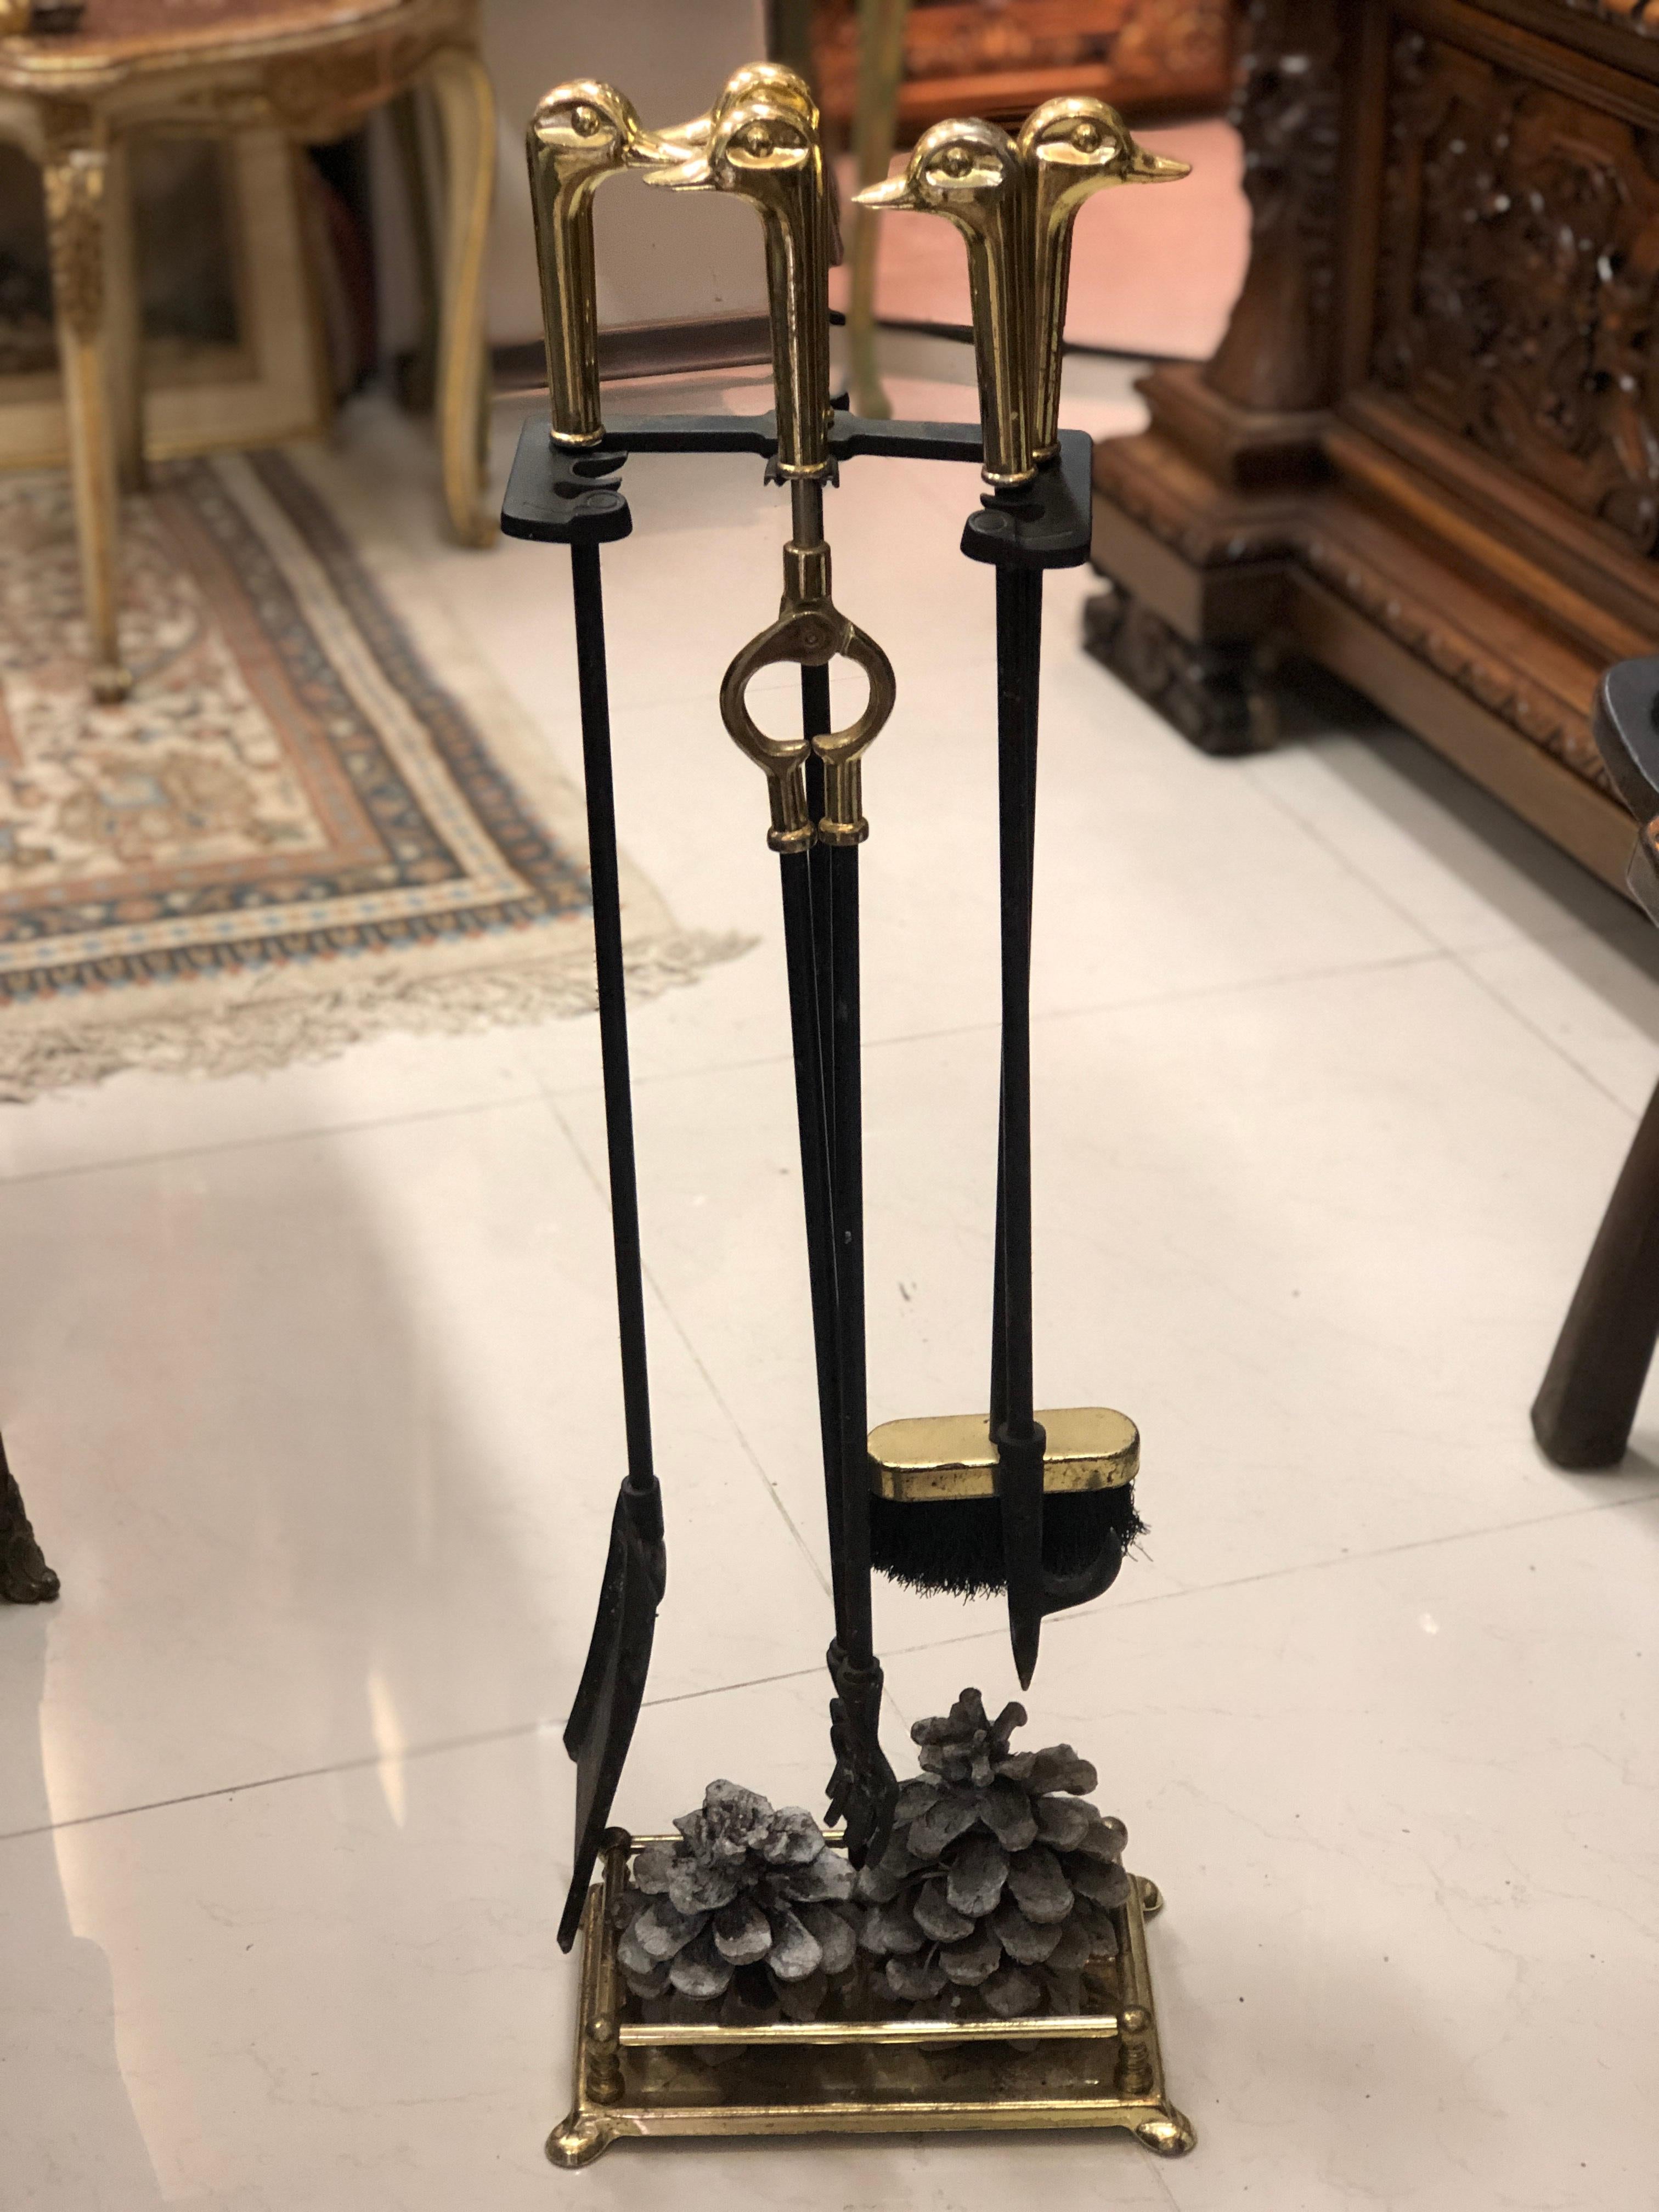 A fine antique French fire place tool set and stand with beautiful bronze duck heads handles.
France, circa 1900.